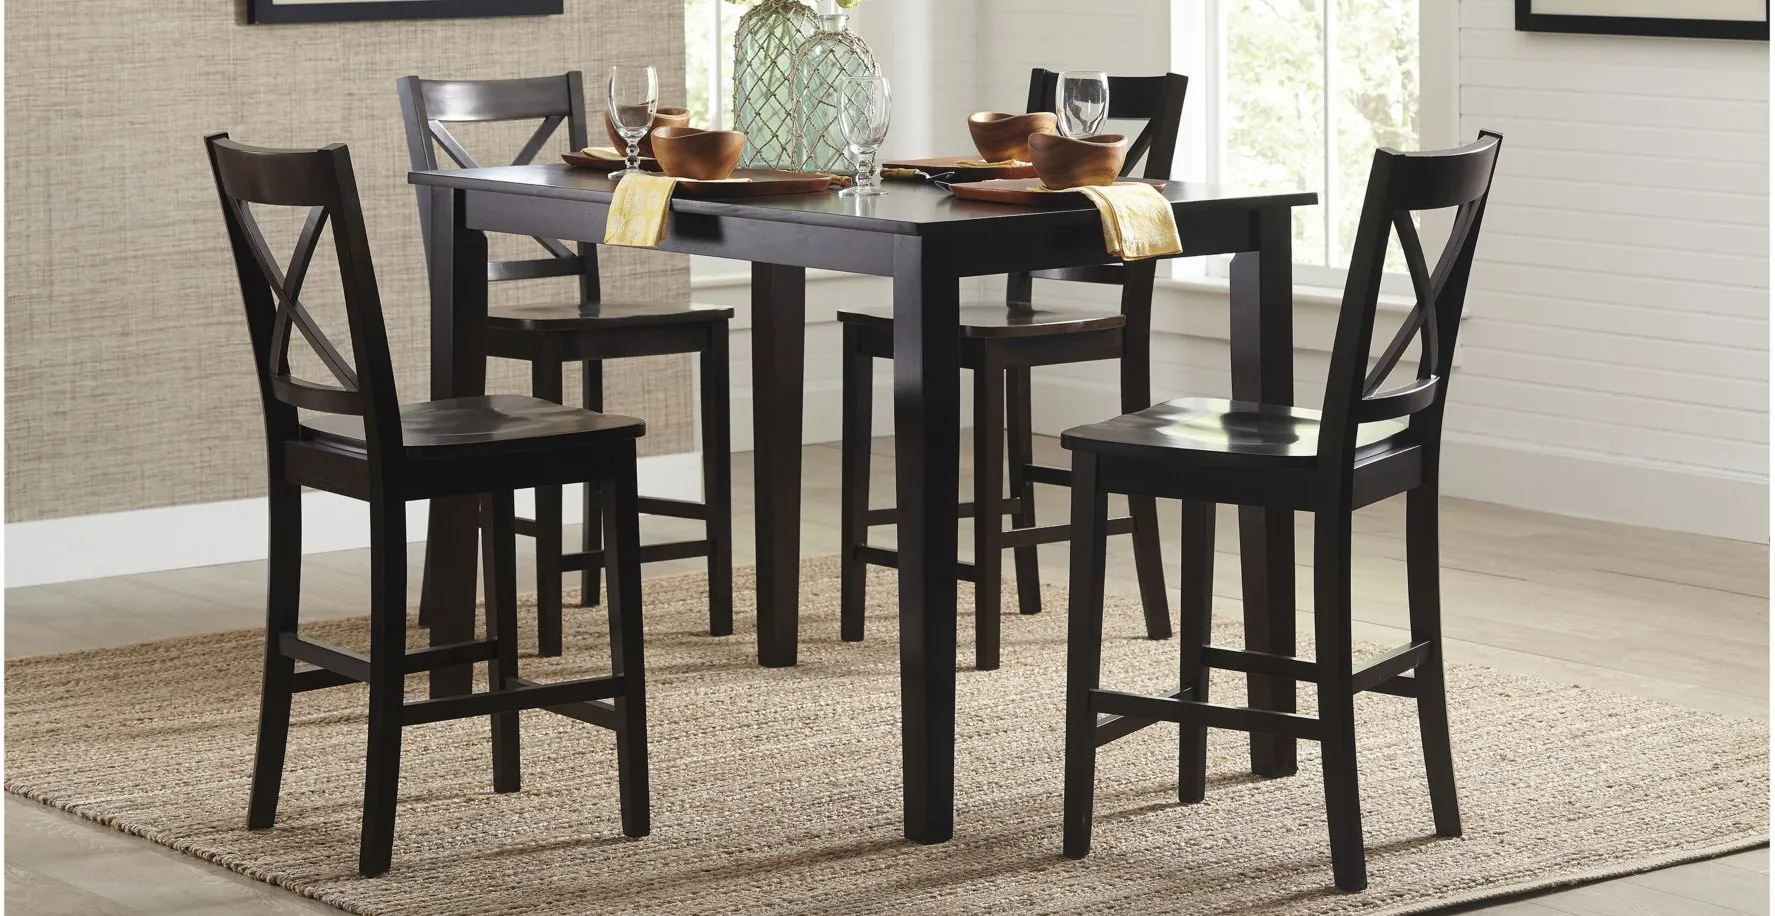 Simplicity 5-pc. Counter-Height Dining Set in Espresso by Jofran